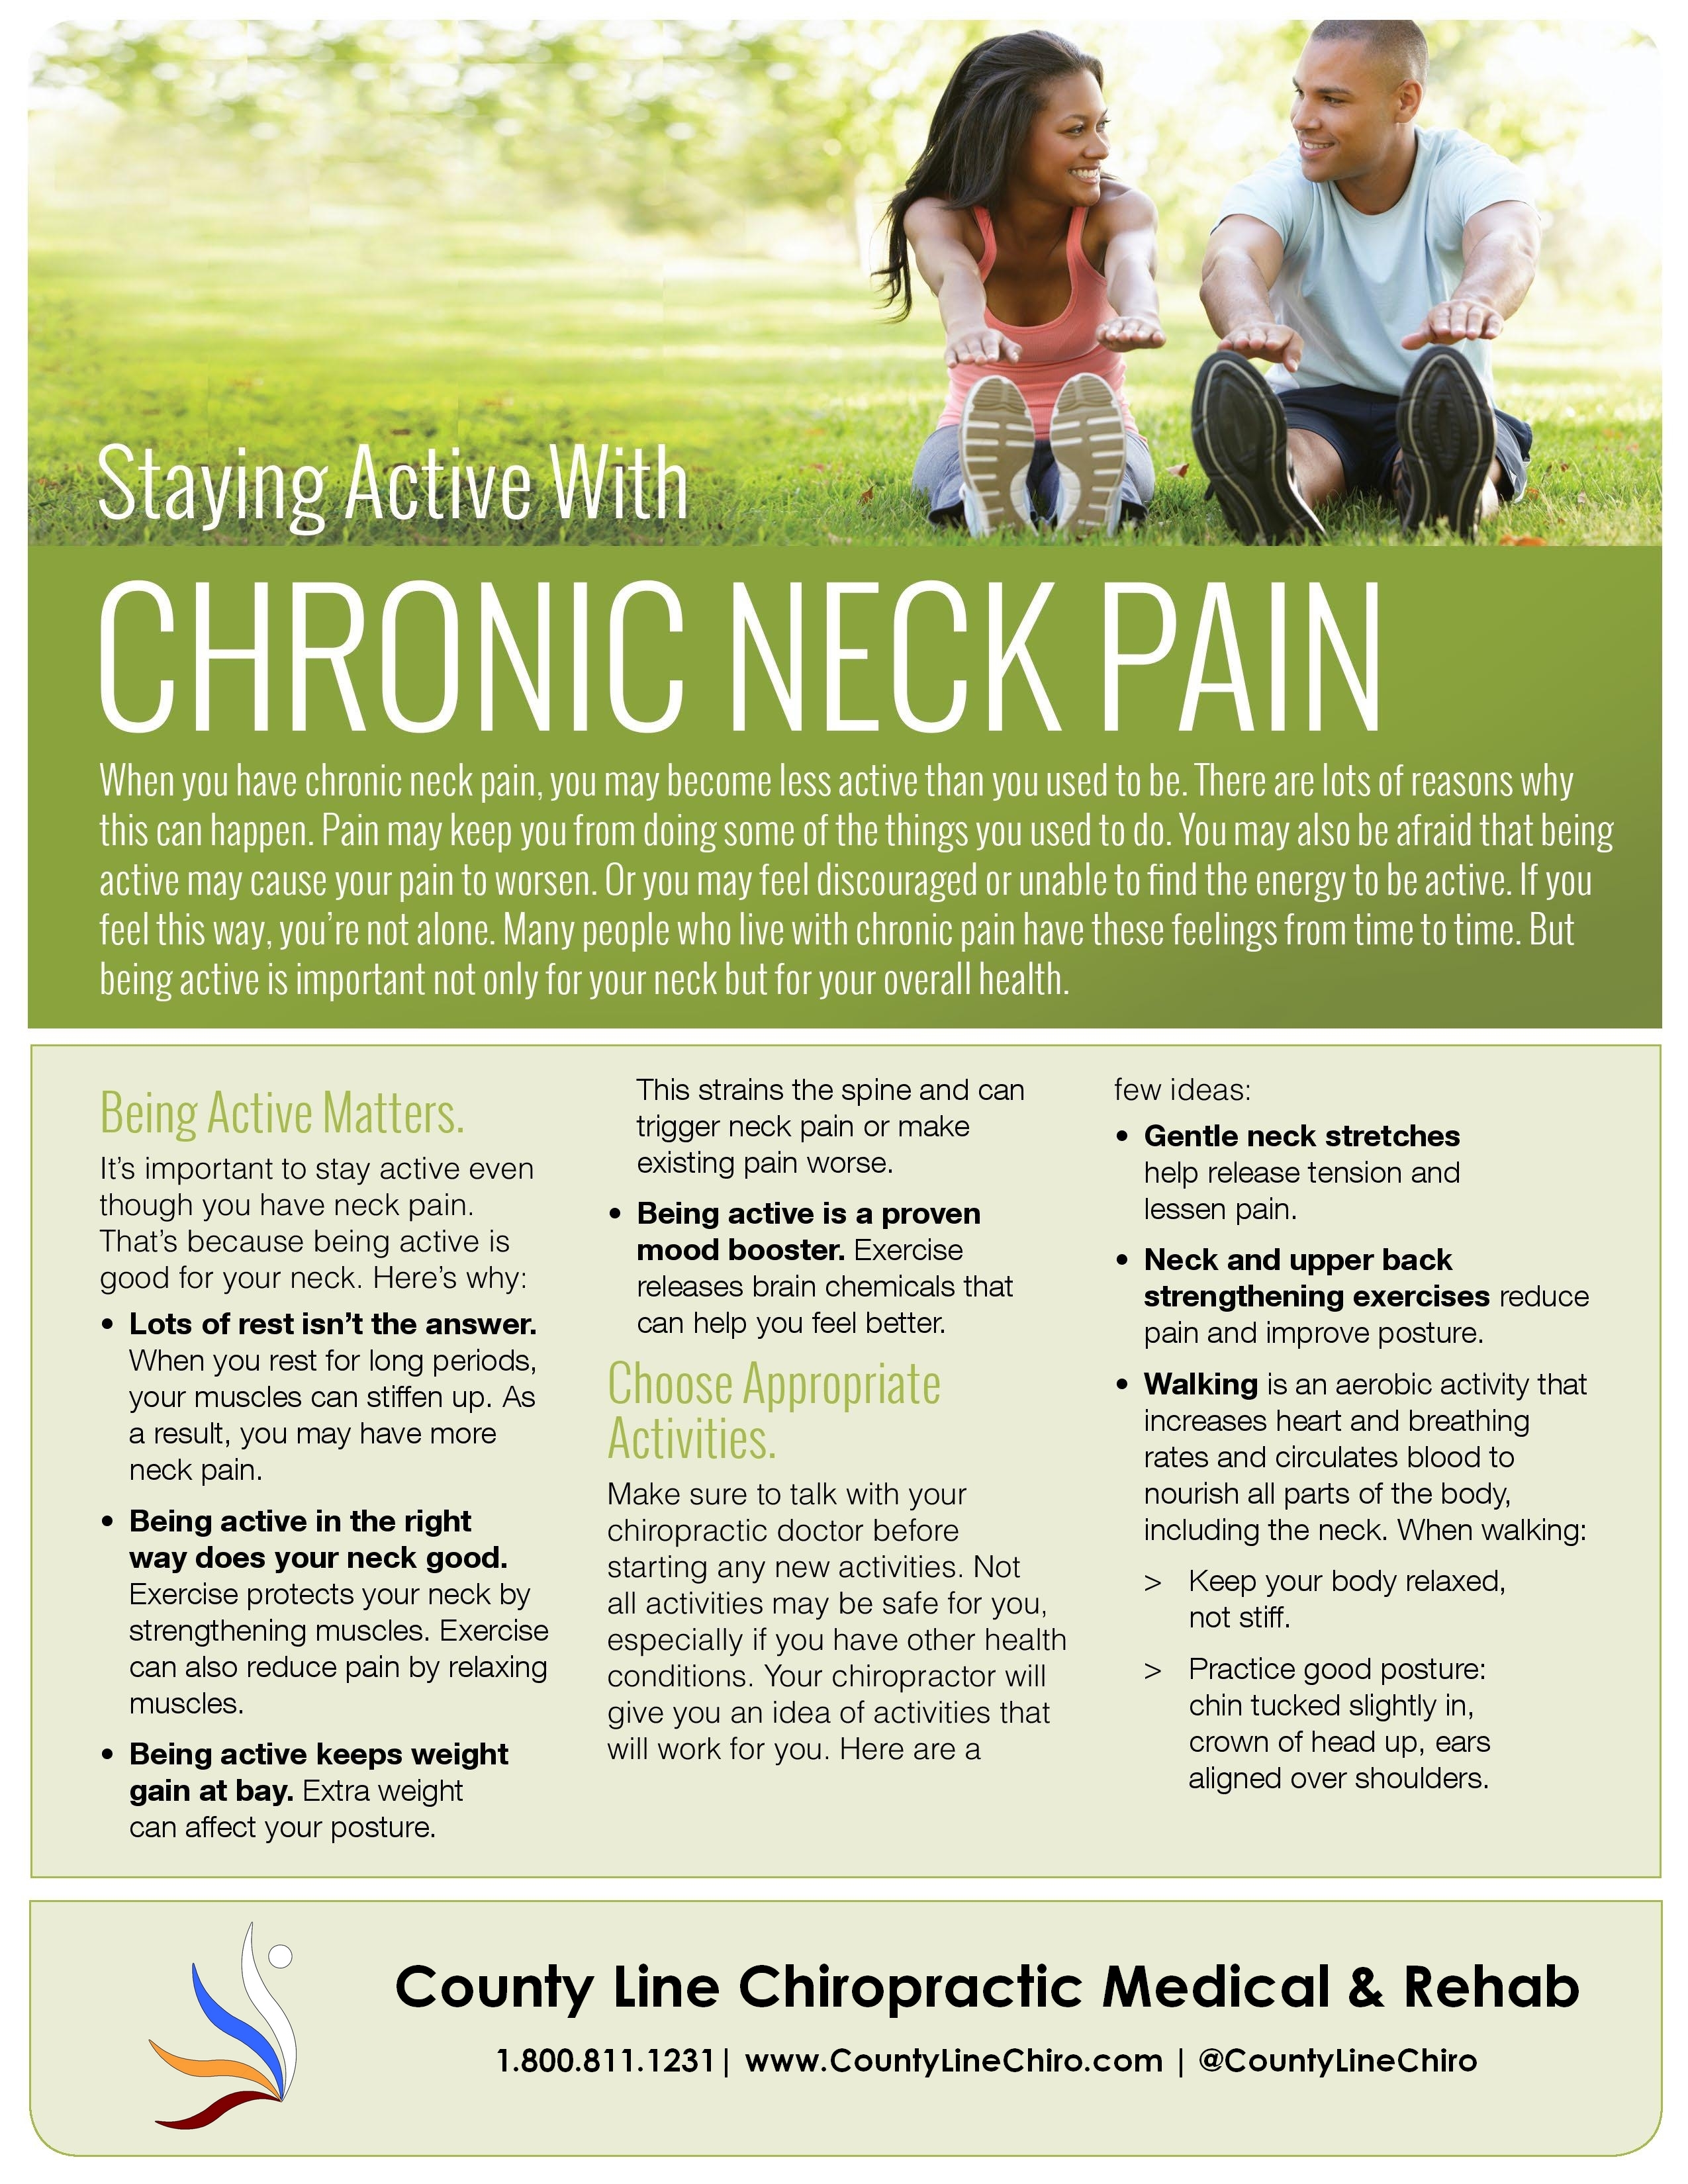 Staying Active With Chronic Neck Pain